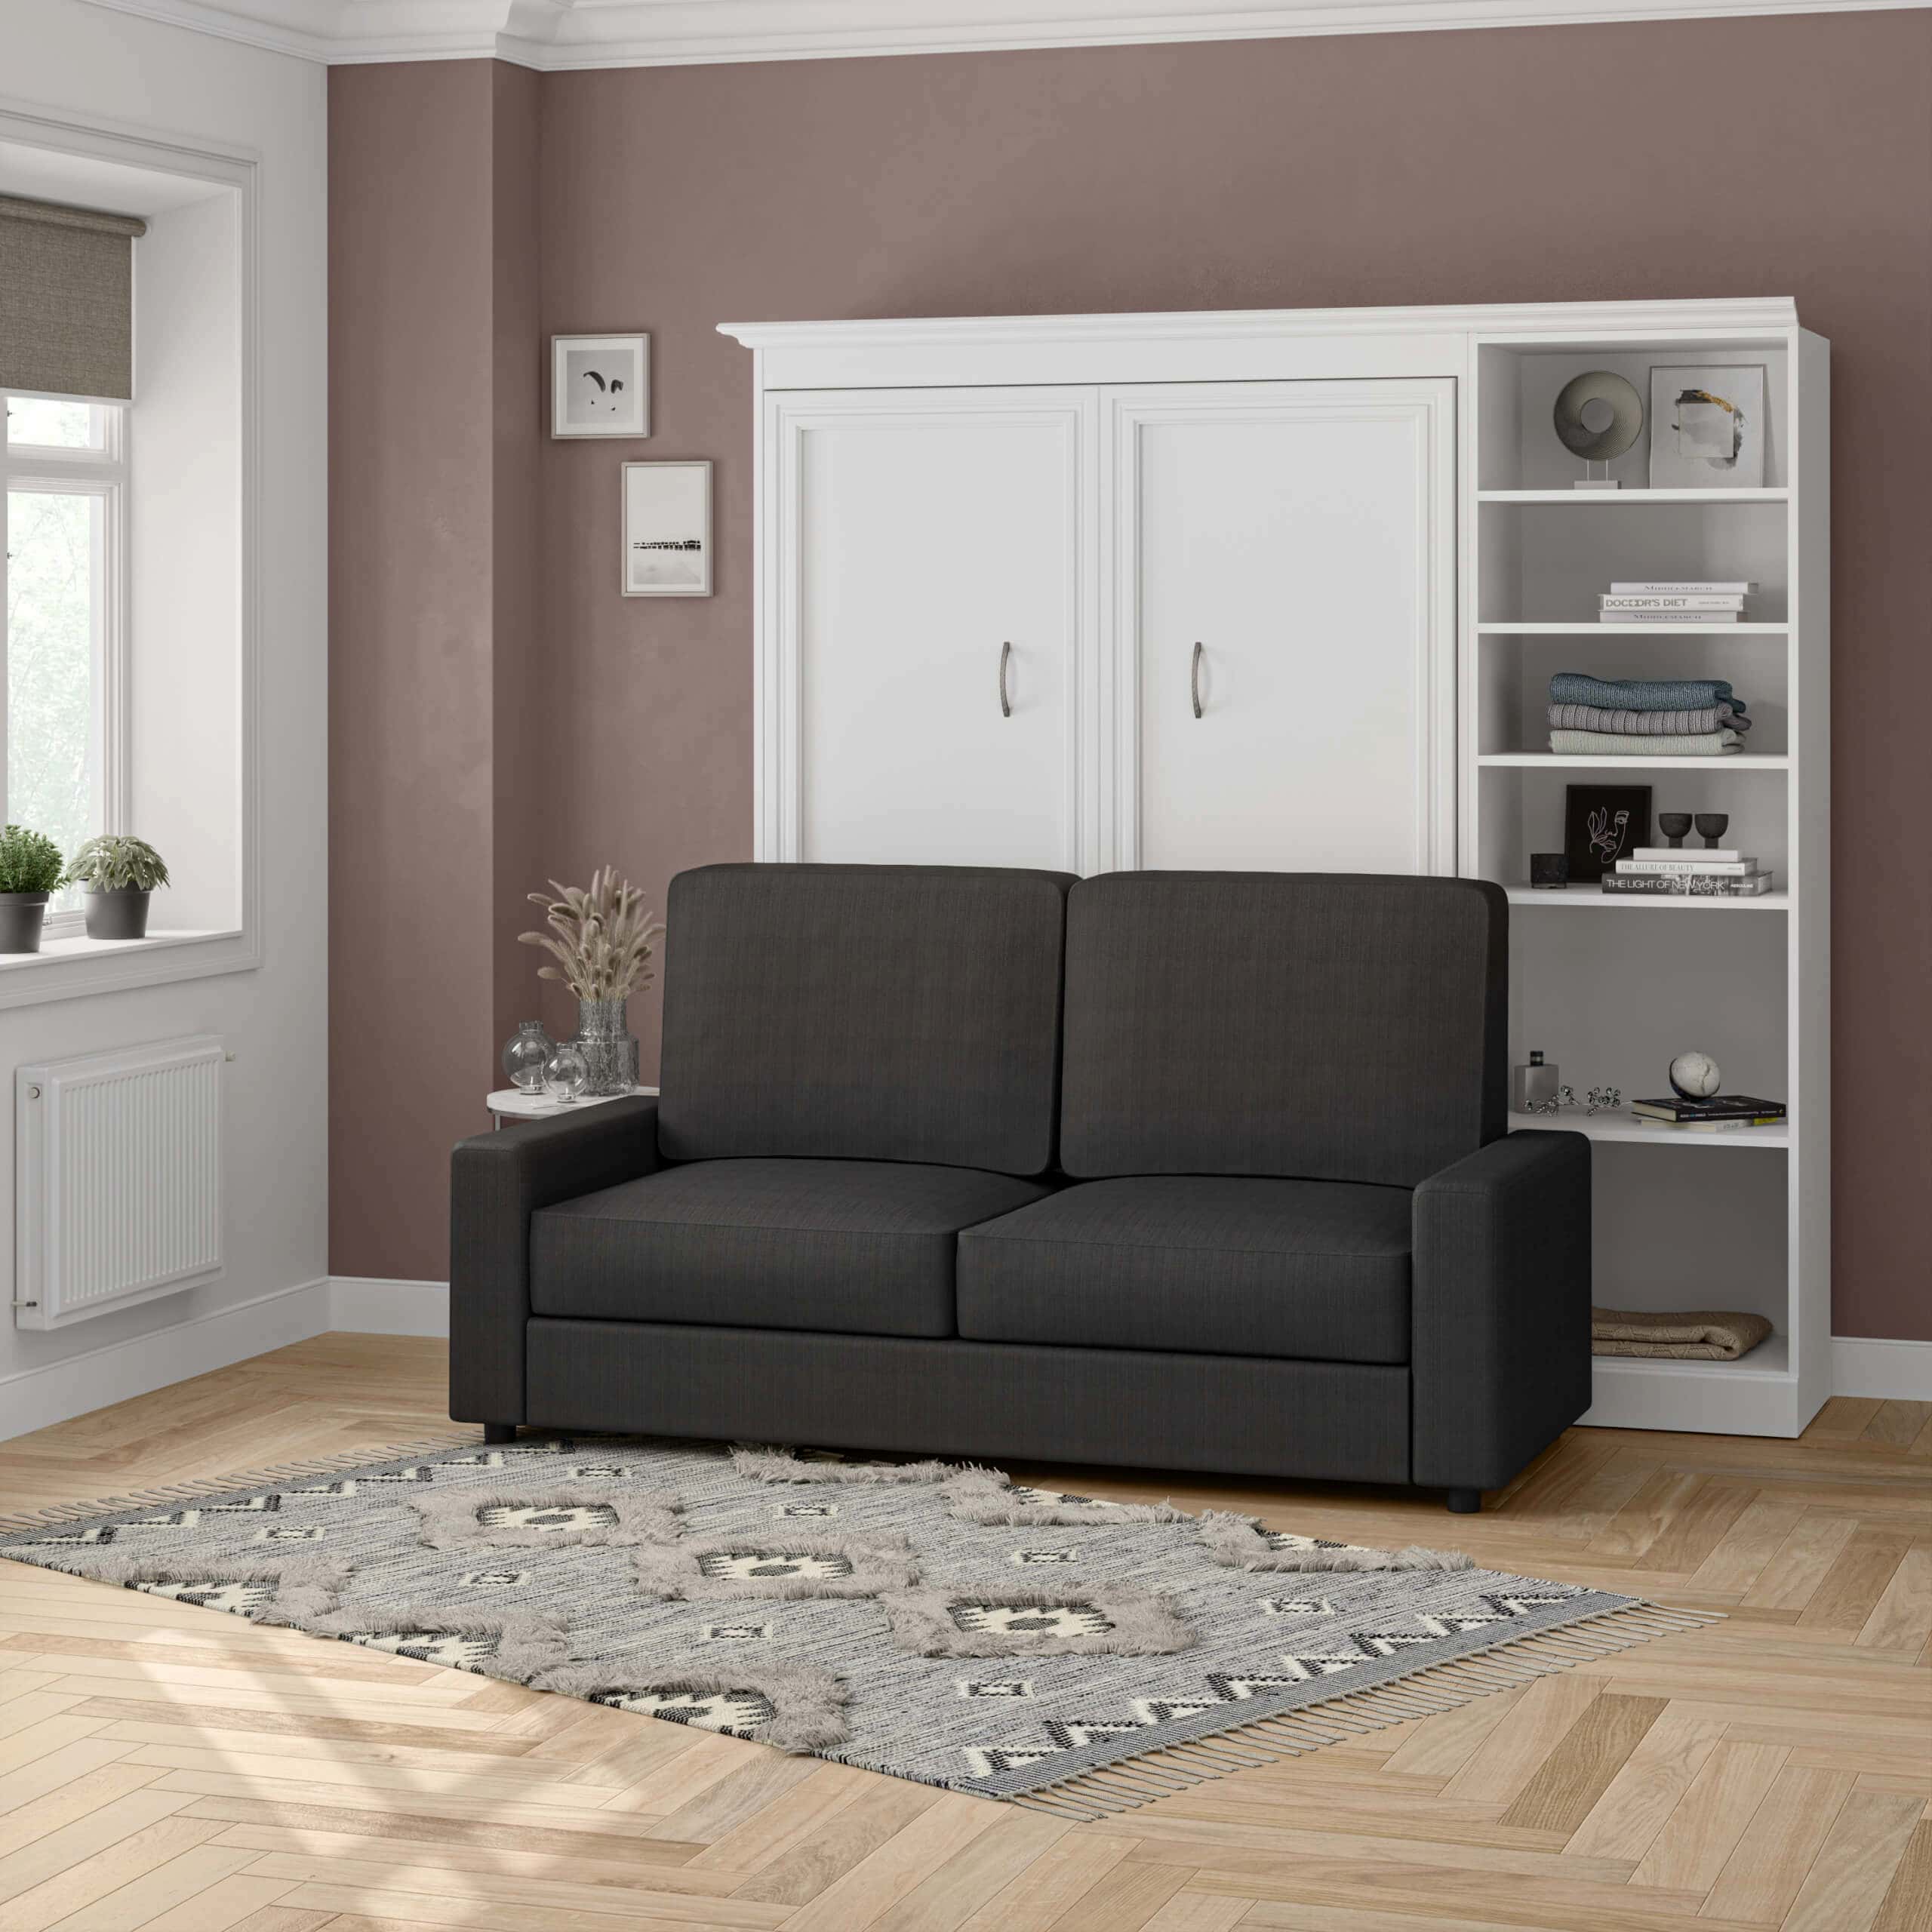 Choose the Versatility of a Wall Bed with Couch